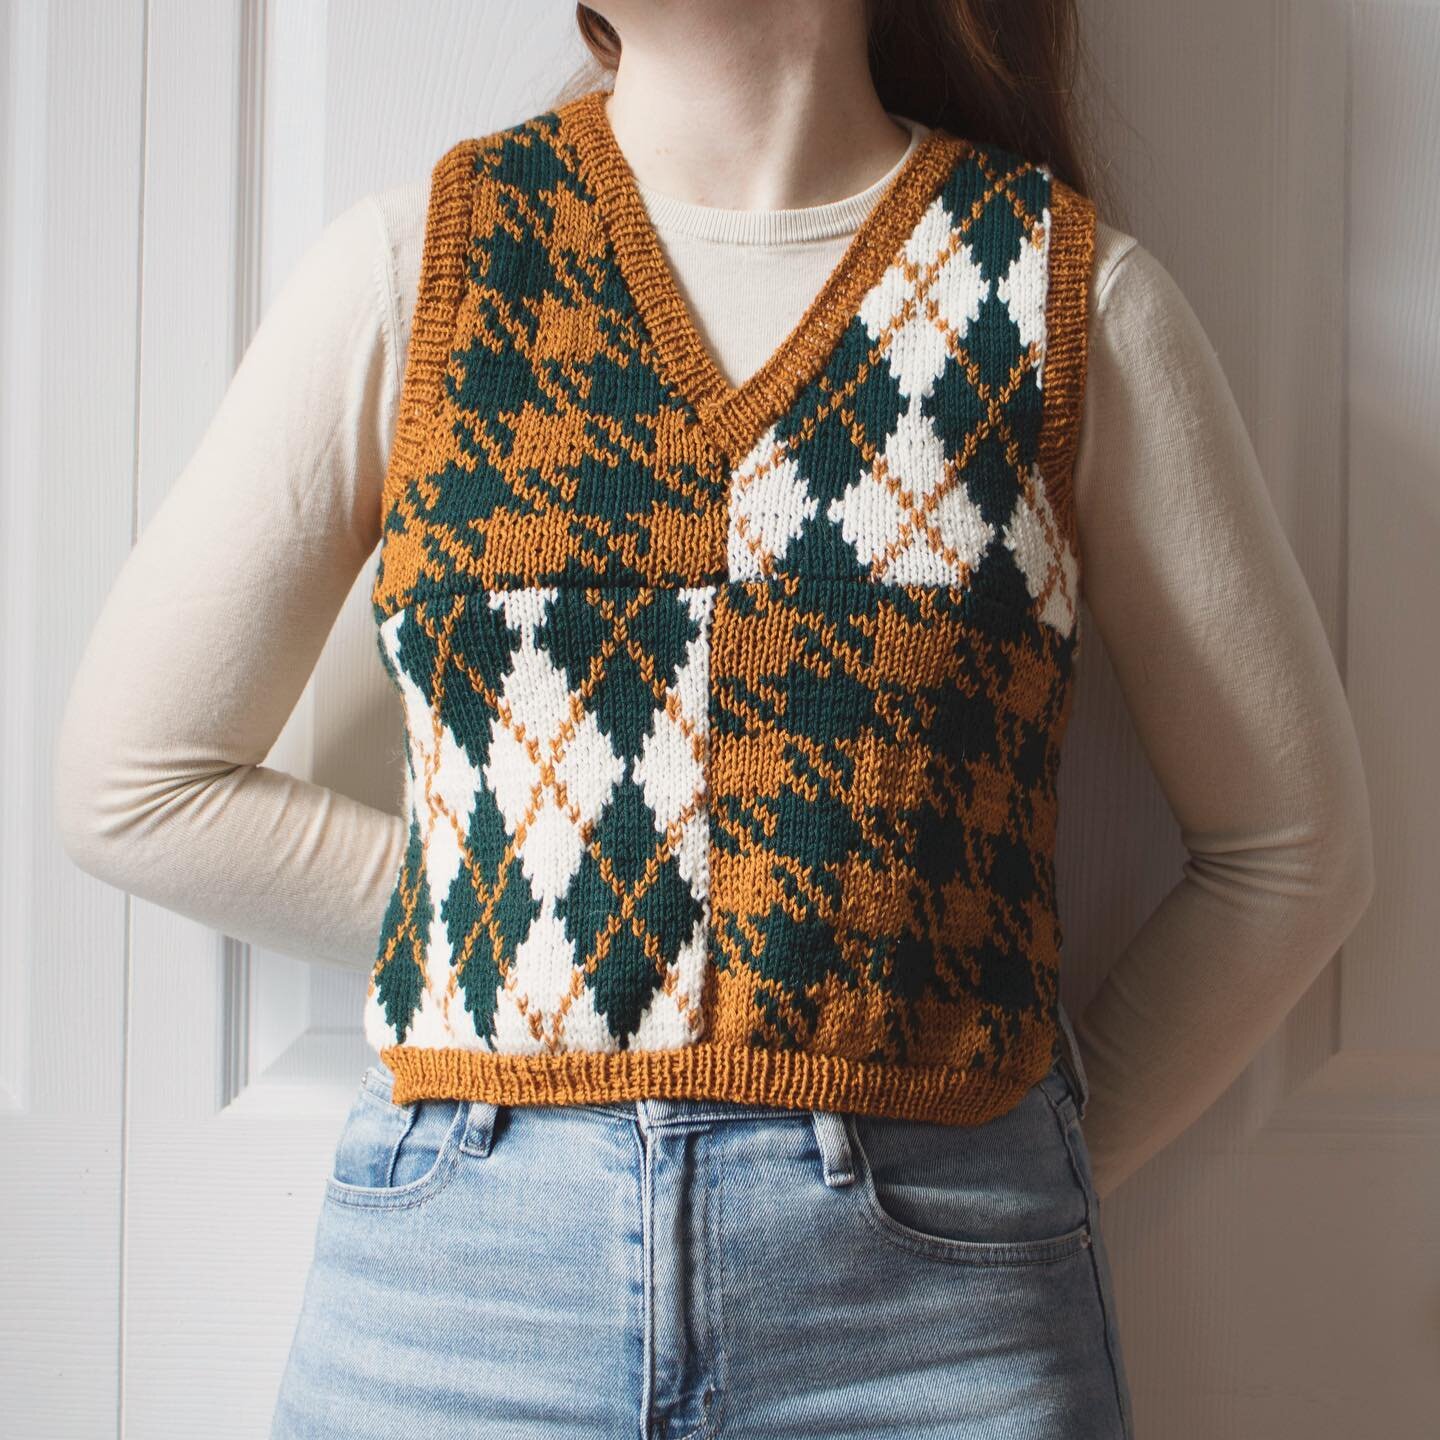 another patchwork sweater vest &mdash; hand knit and reversible!  Messing around with traditionally woven patterns as knits as of late and I love how this one turned out. $300, fits size S/M⁣
⁣
.⁣
⁣
.⁣
⁣
.⁣
⁣
.⁣
⁣
.⁣
⁣
#handmade #fashiondesign #handk